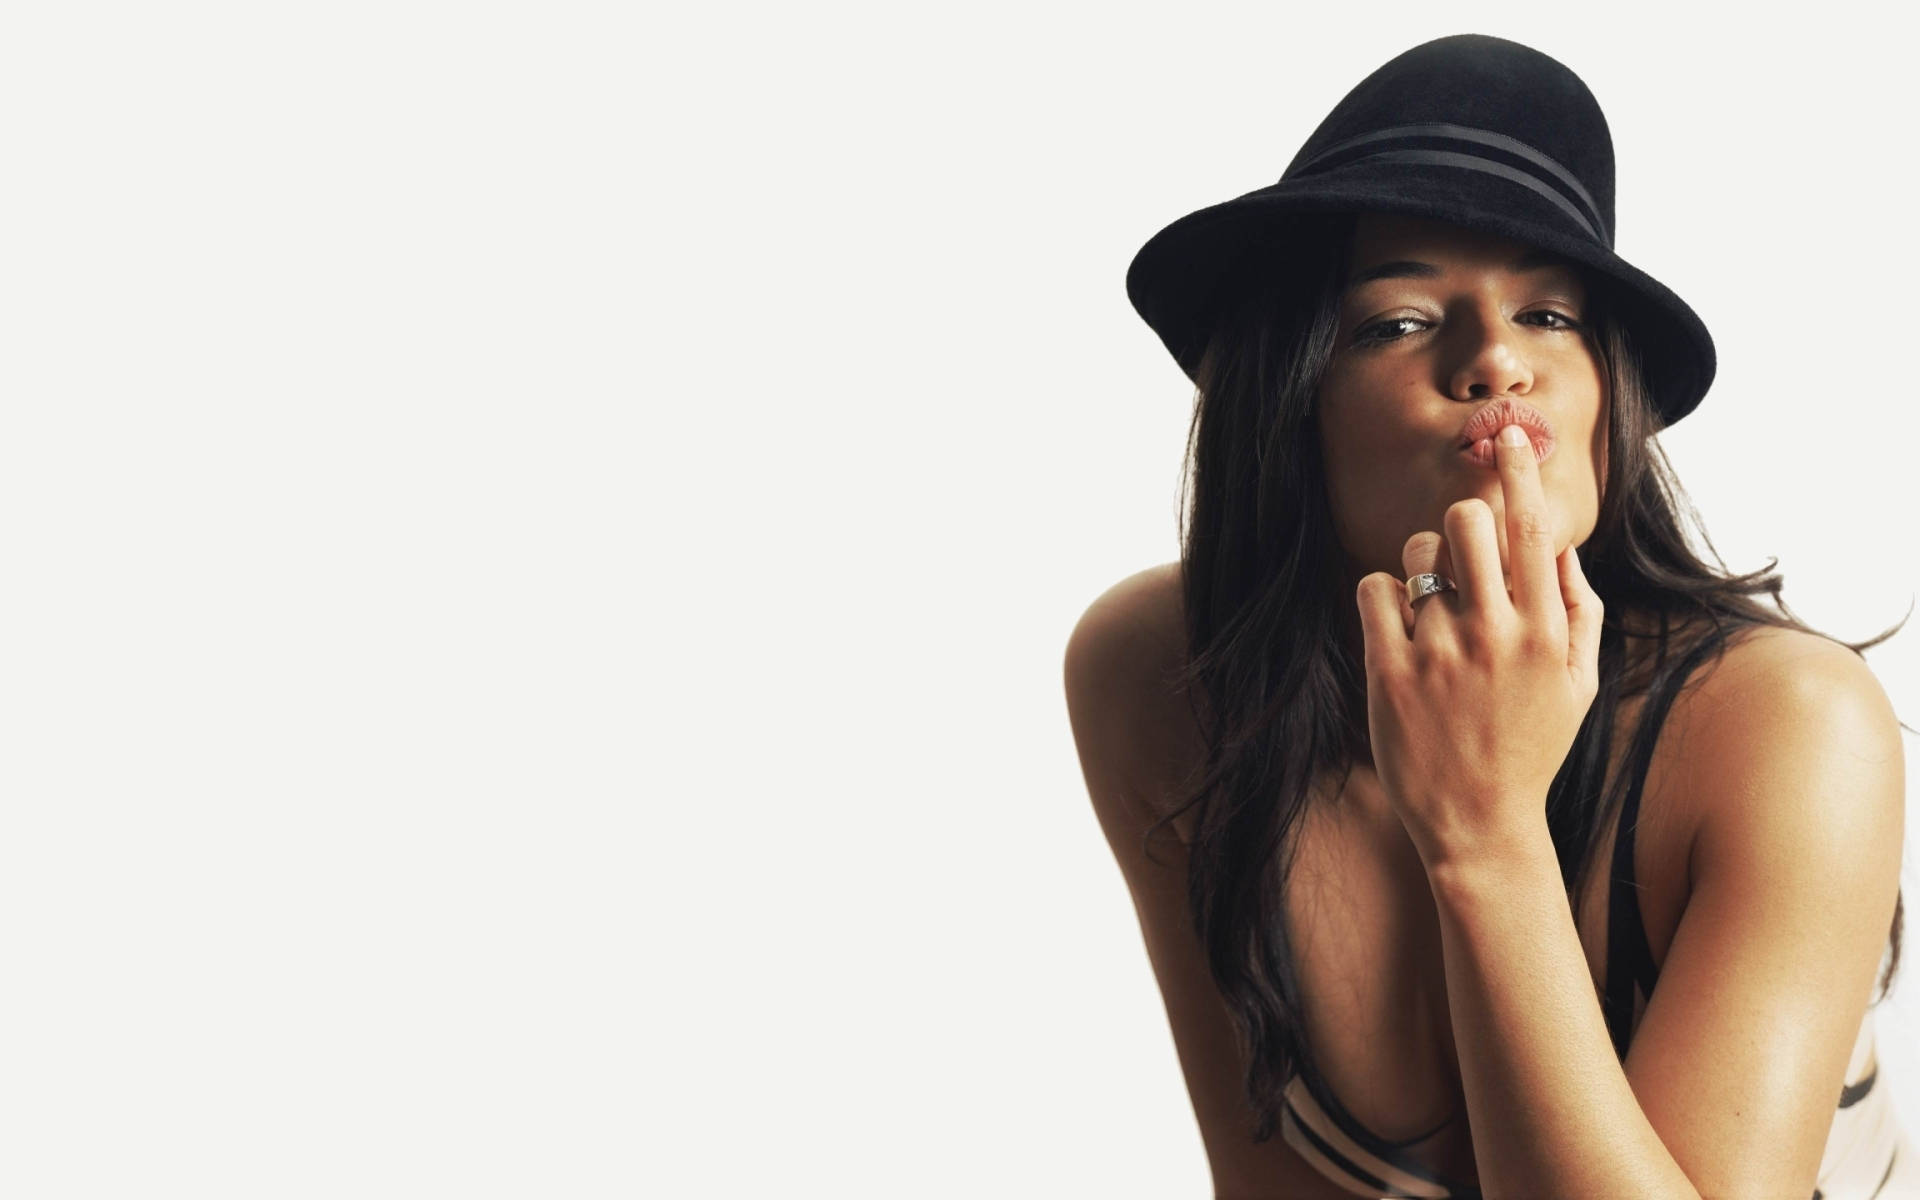 Michelle Rodriguez With A Fedora Hat Wallpaper